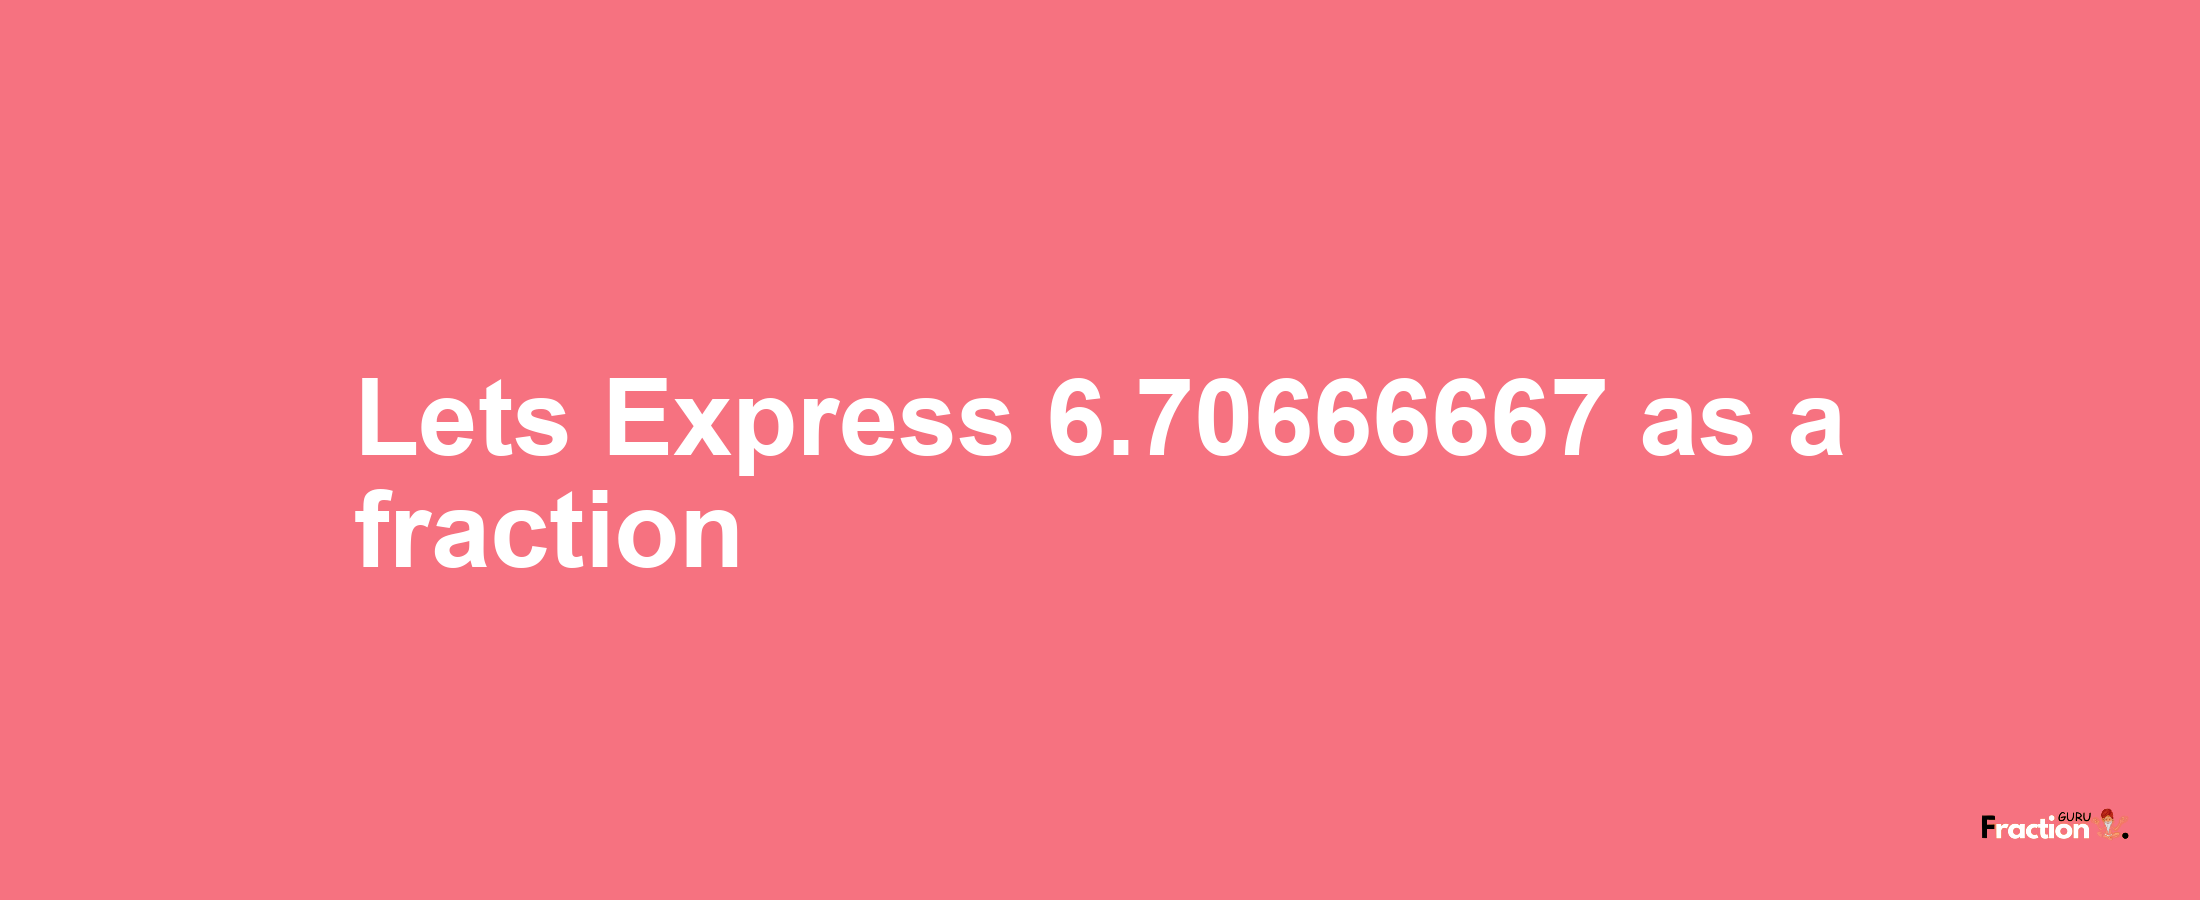 Lets Express 6.70666667 as afraction